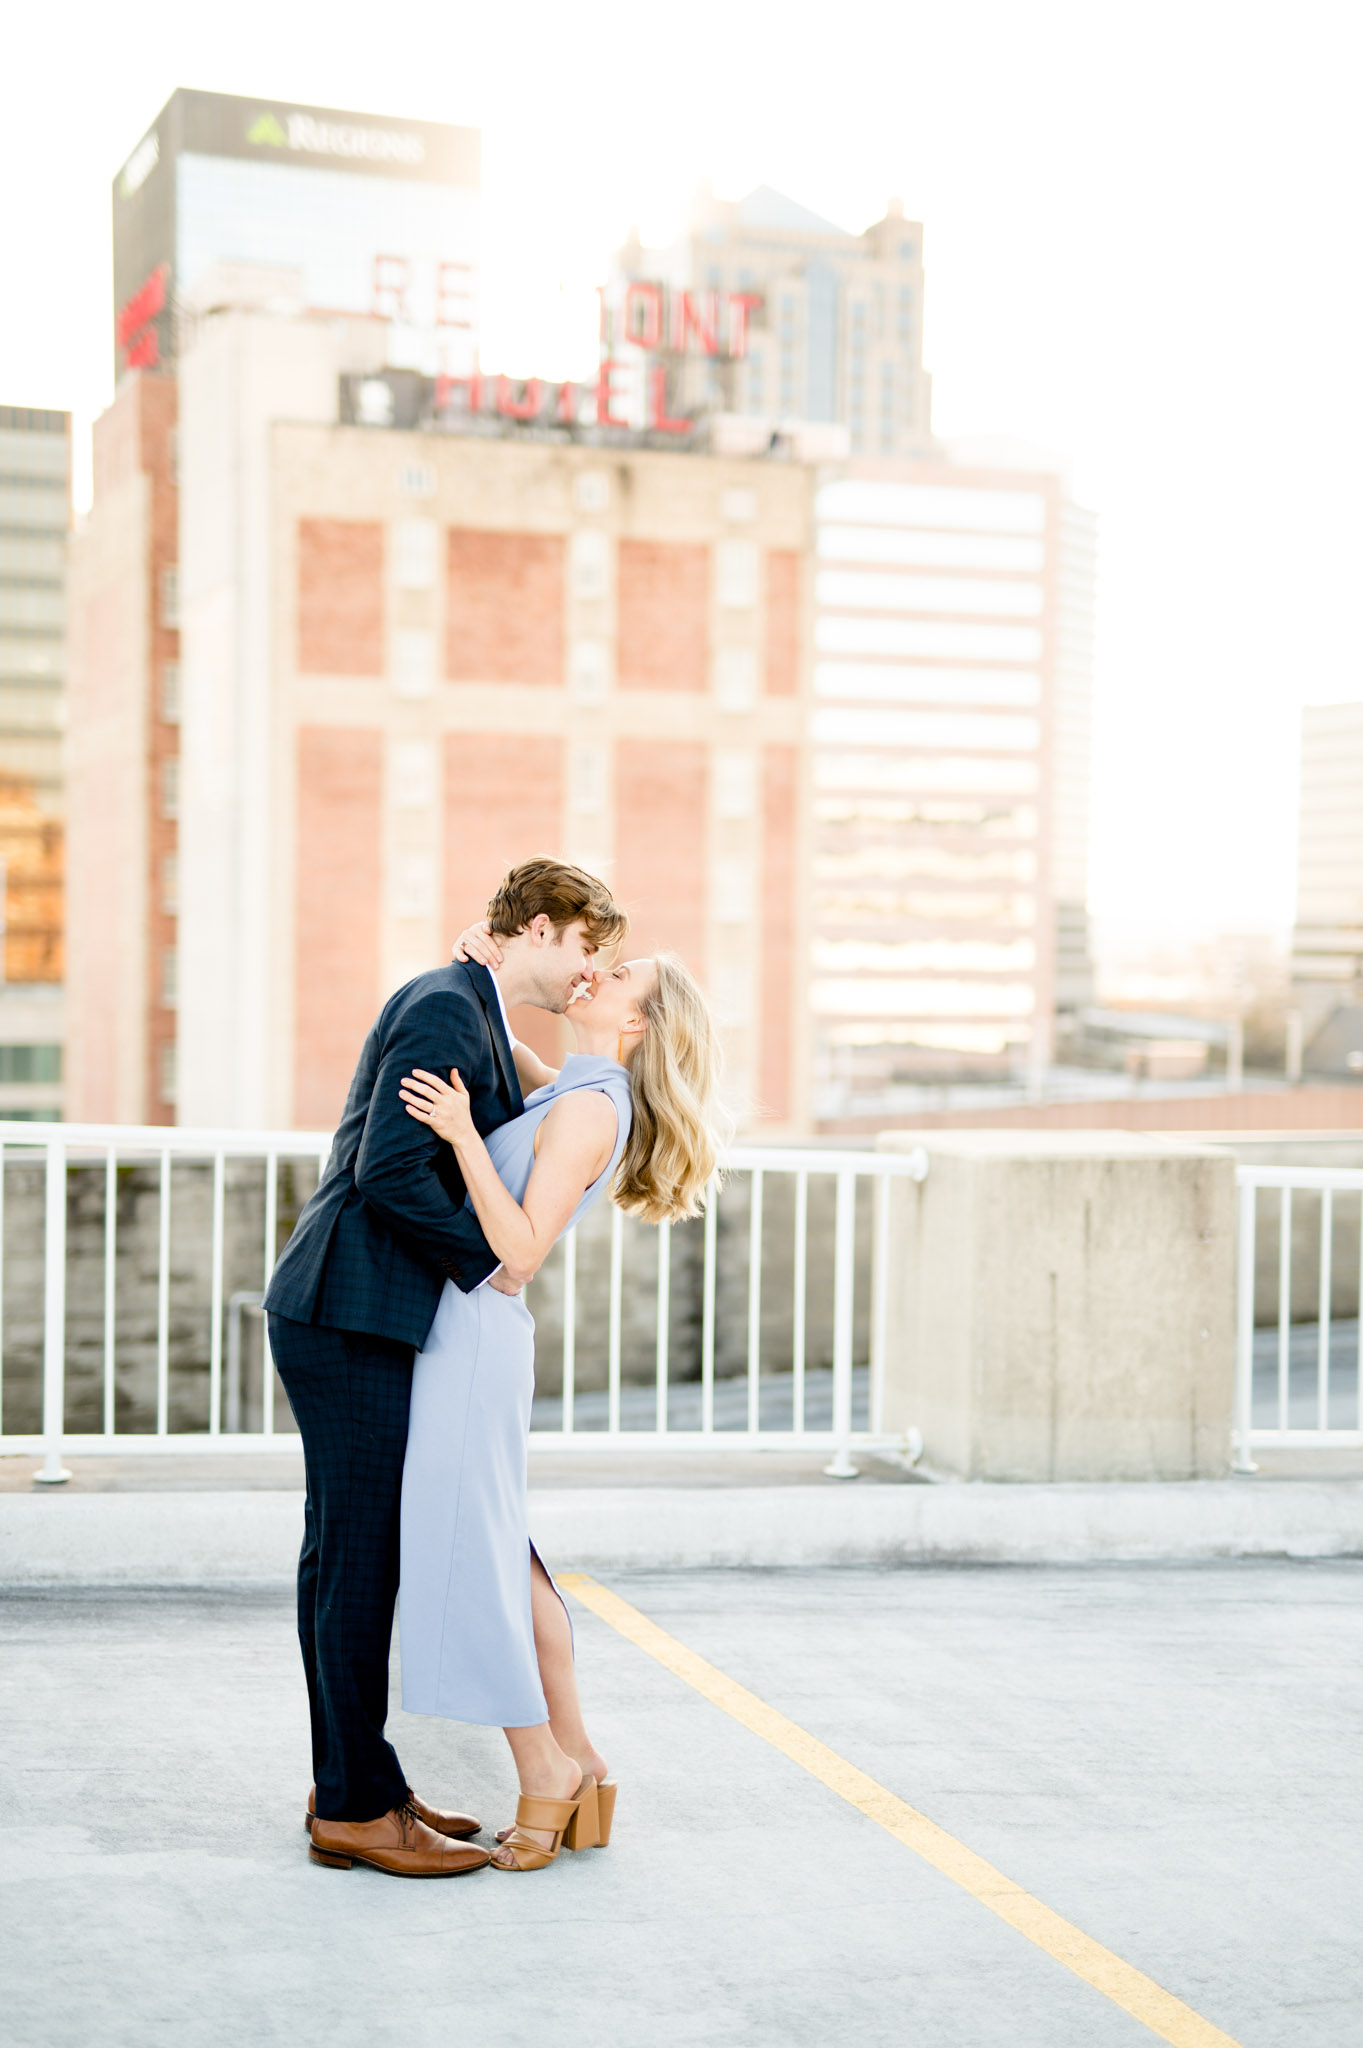 Couple kisses on rooftop in city.